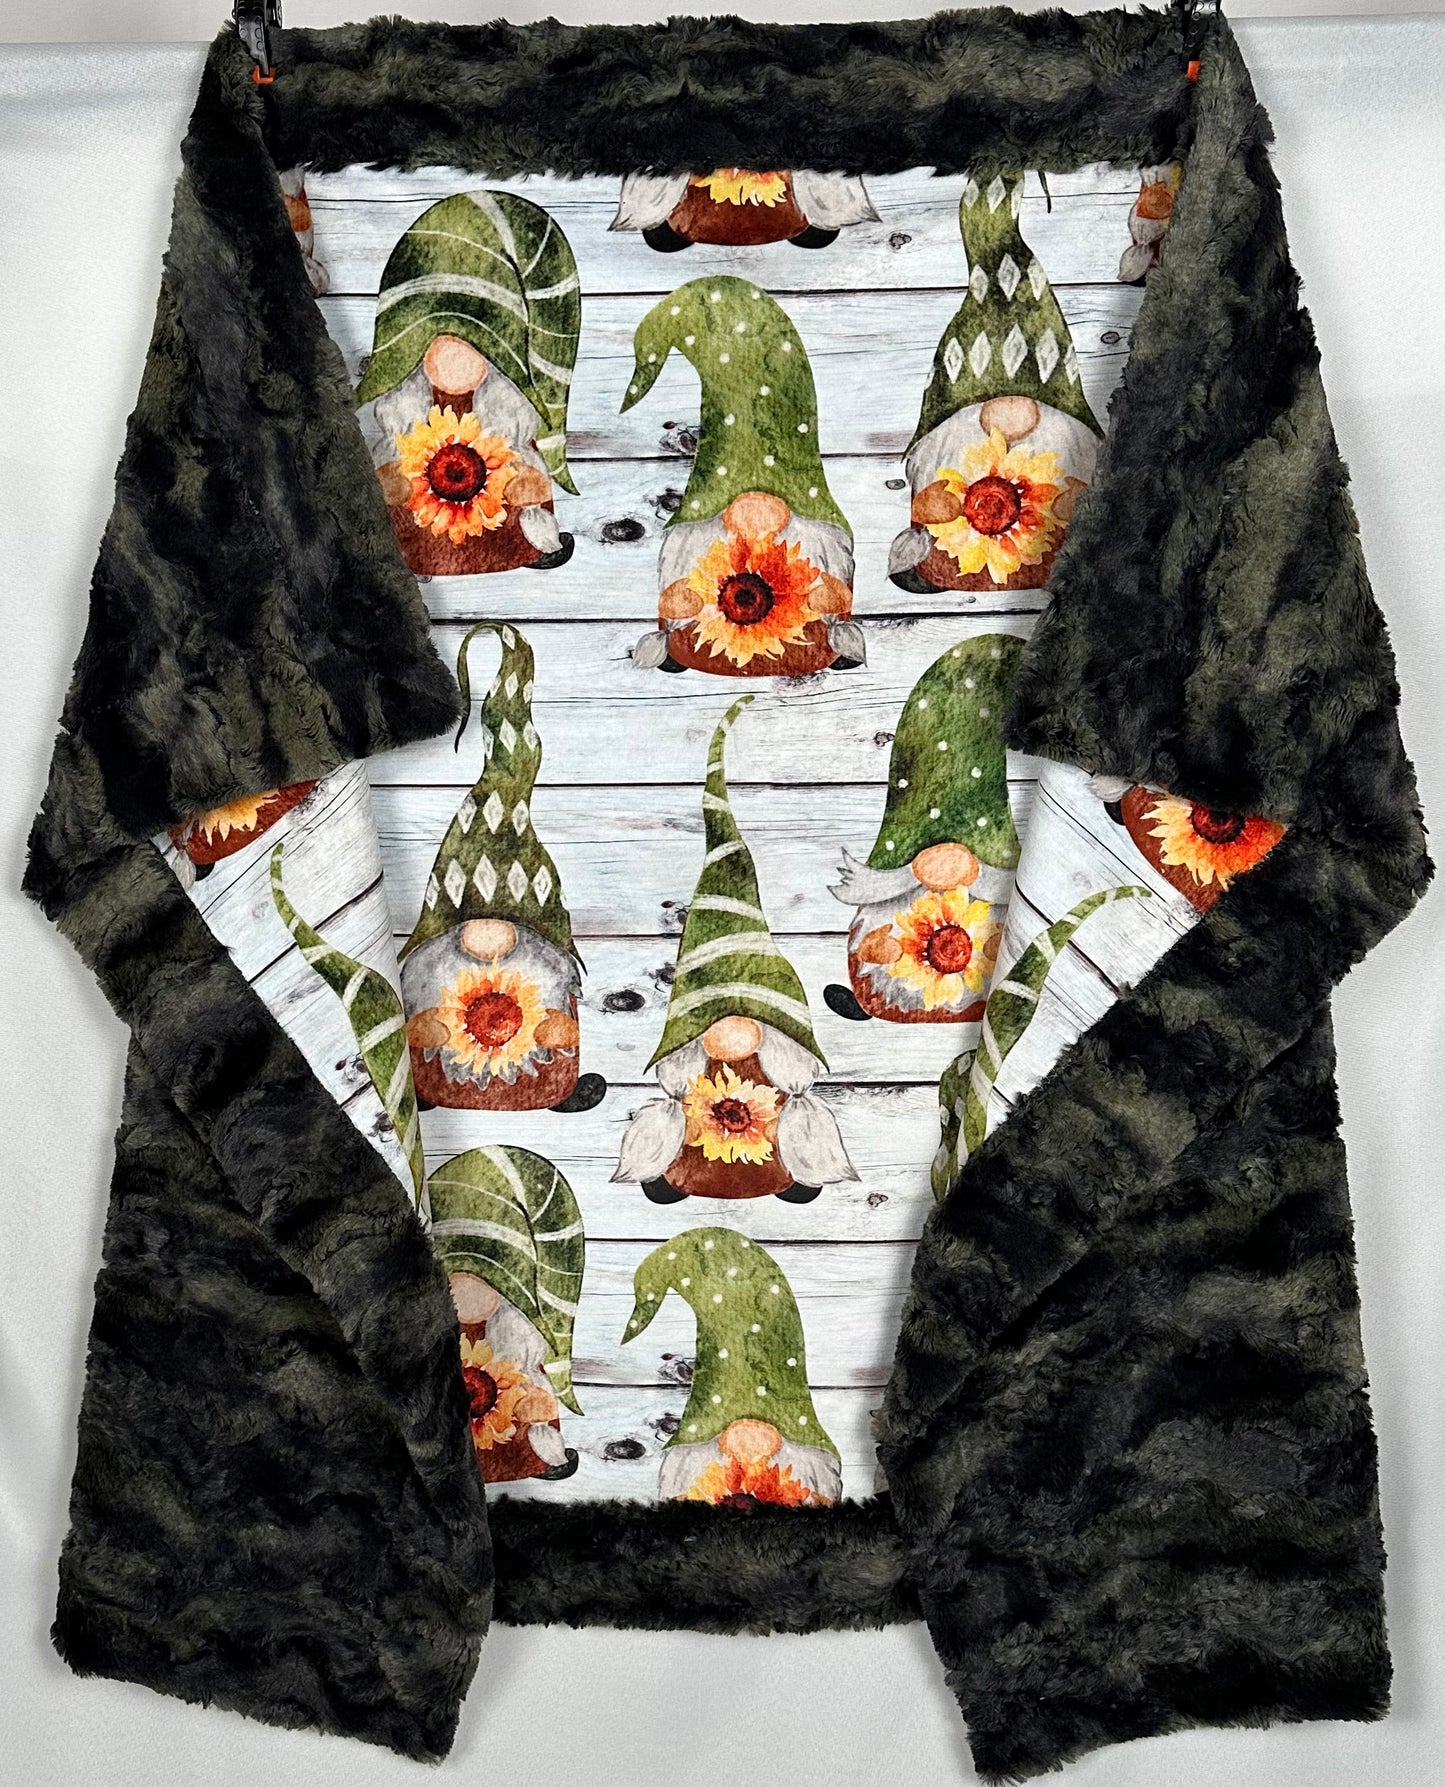 Gnomes with Sunflowers and Shiplap on Wild Rabbit Crocodile Camo 41x60 Toddler/Travel Blanket with 12x20 Pillowcase